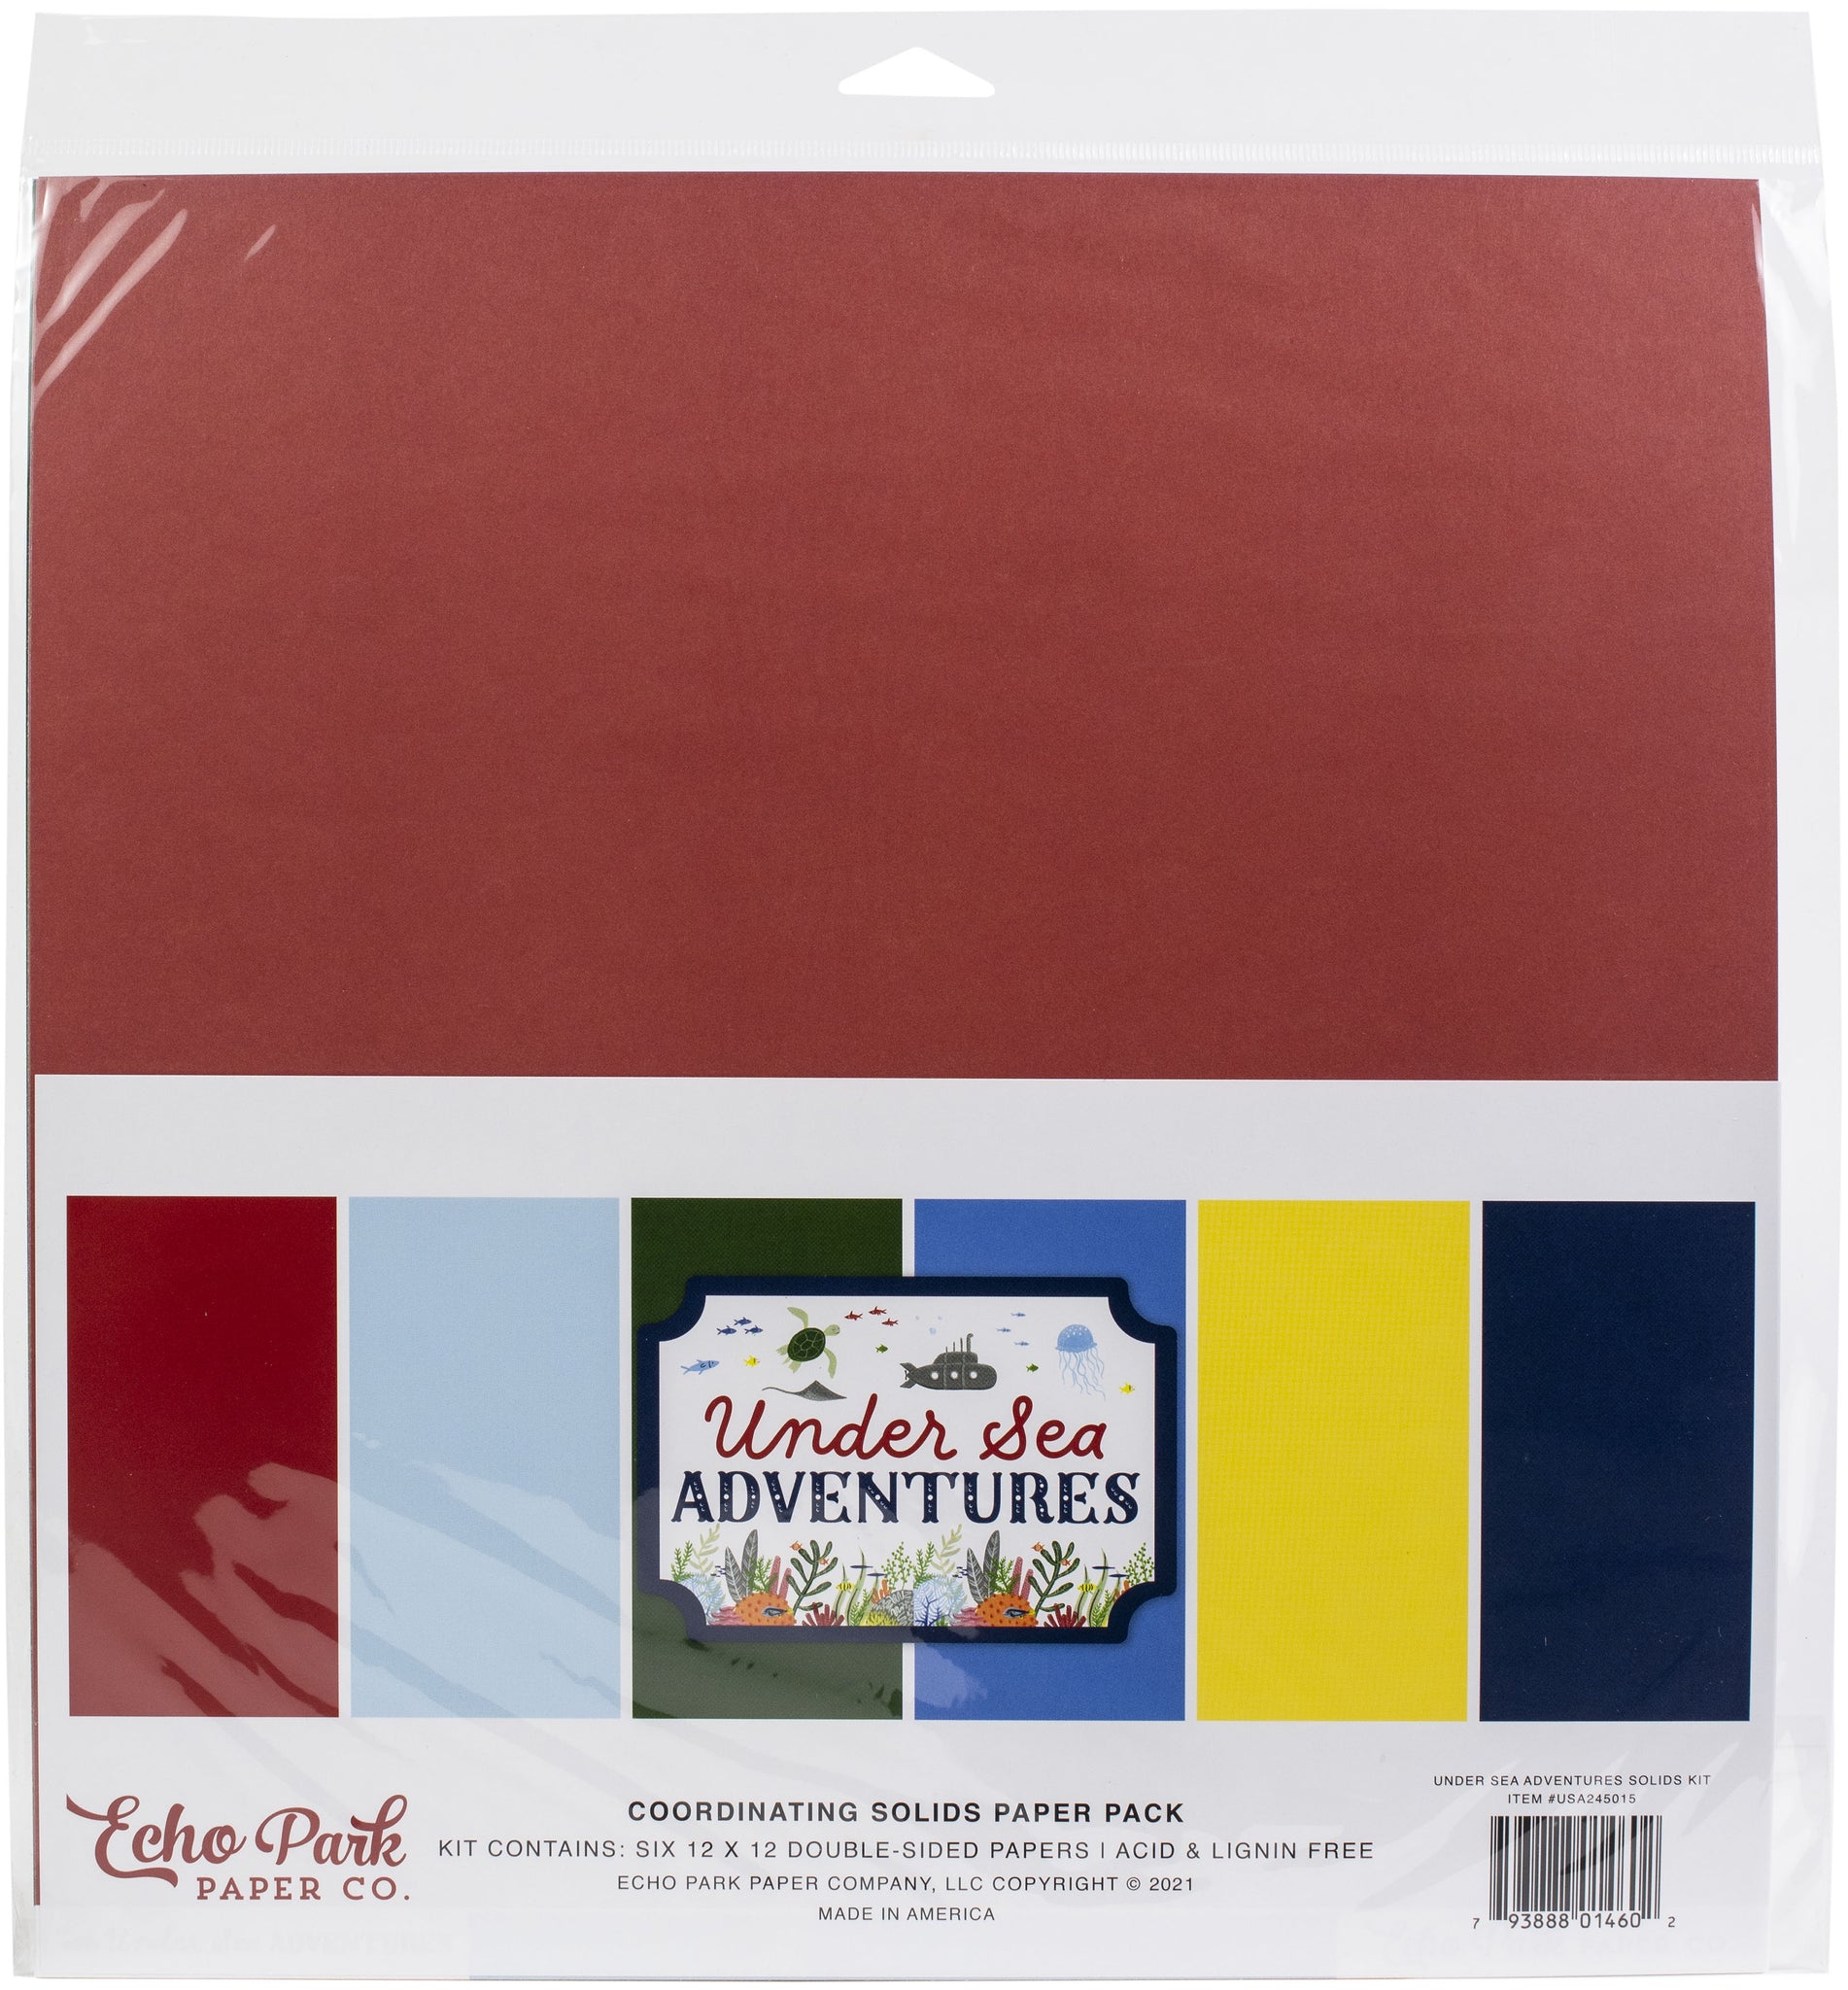 Under Sea Adventures Double-Sided Solid Cardstock